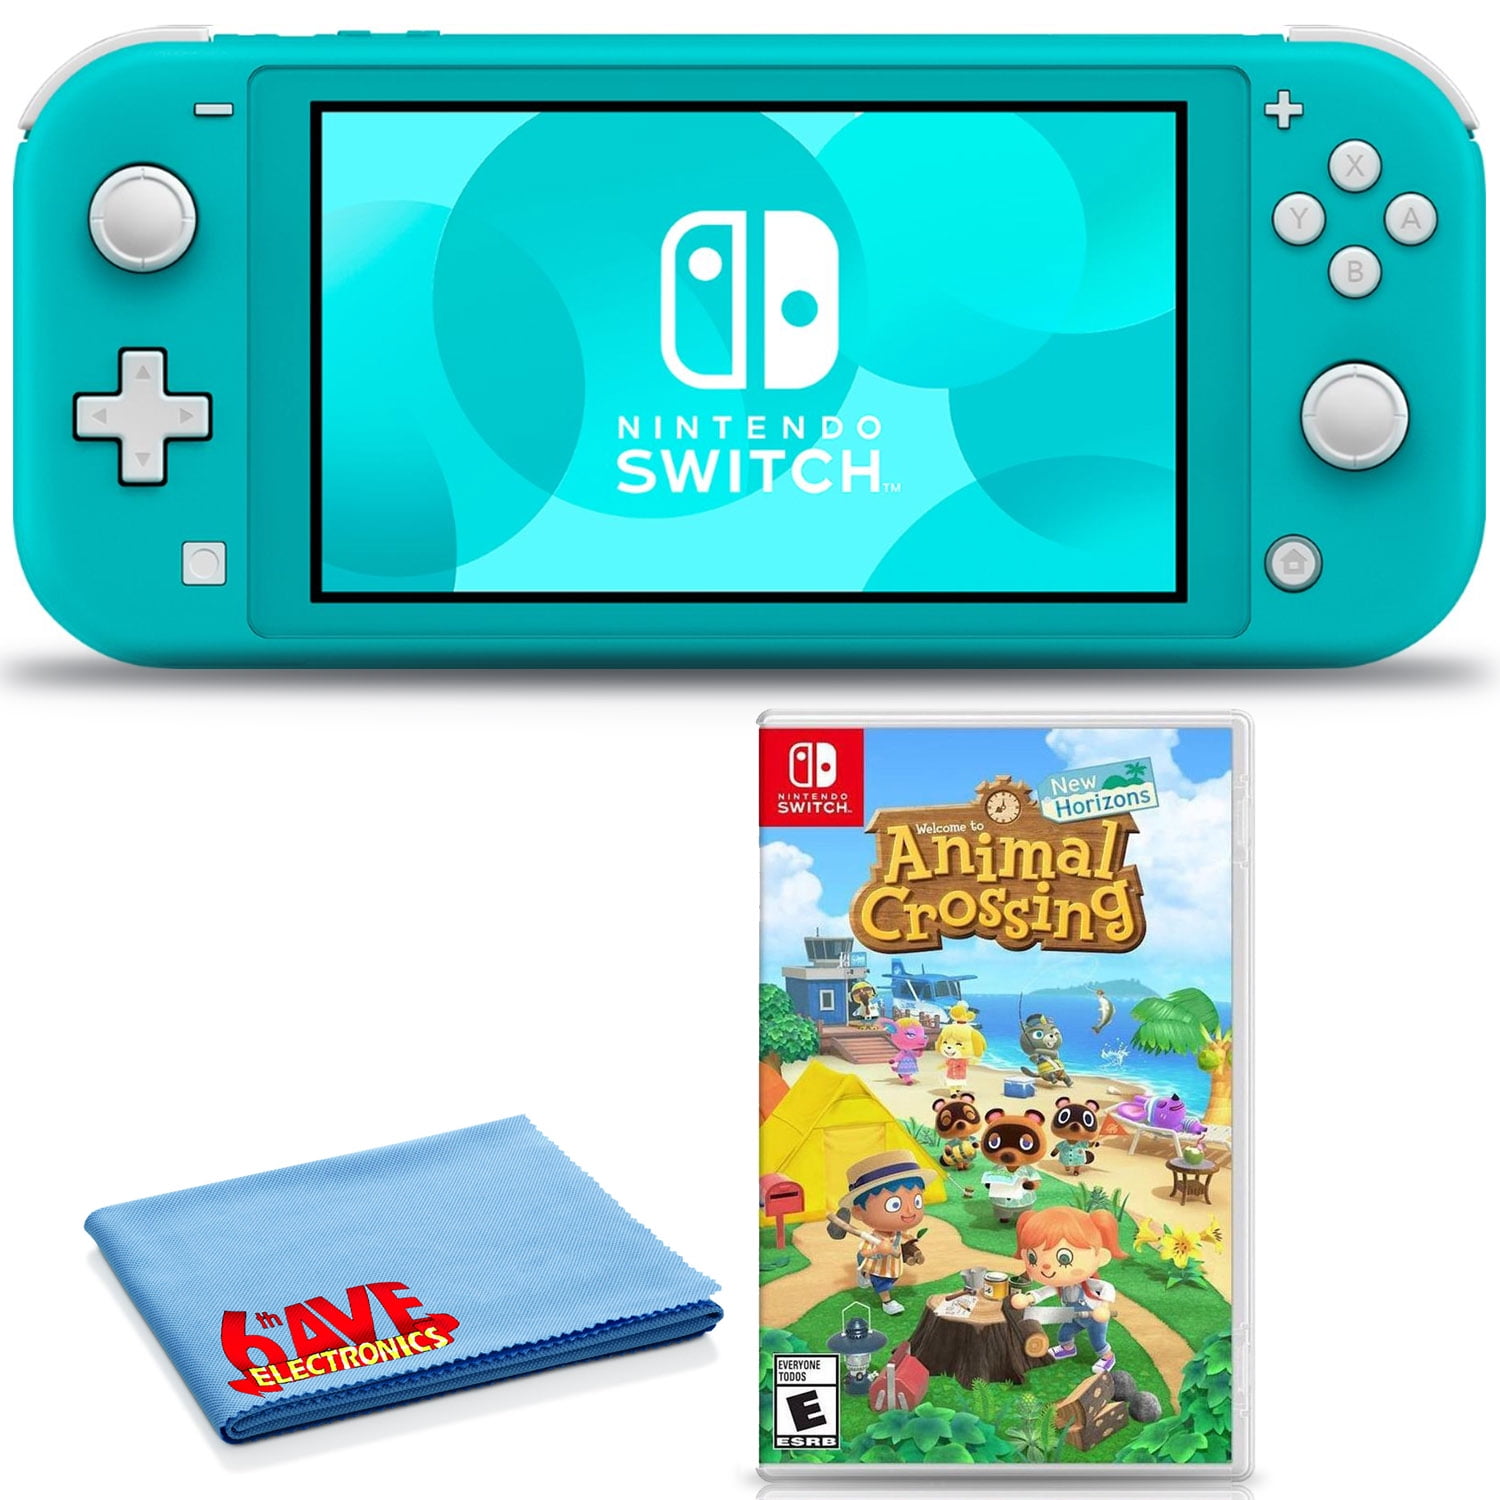 Nintendo Switch Lite (Coral) Bundle Includes Animal Crossing: New